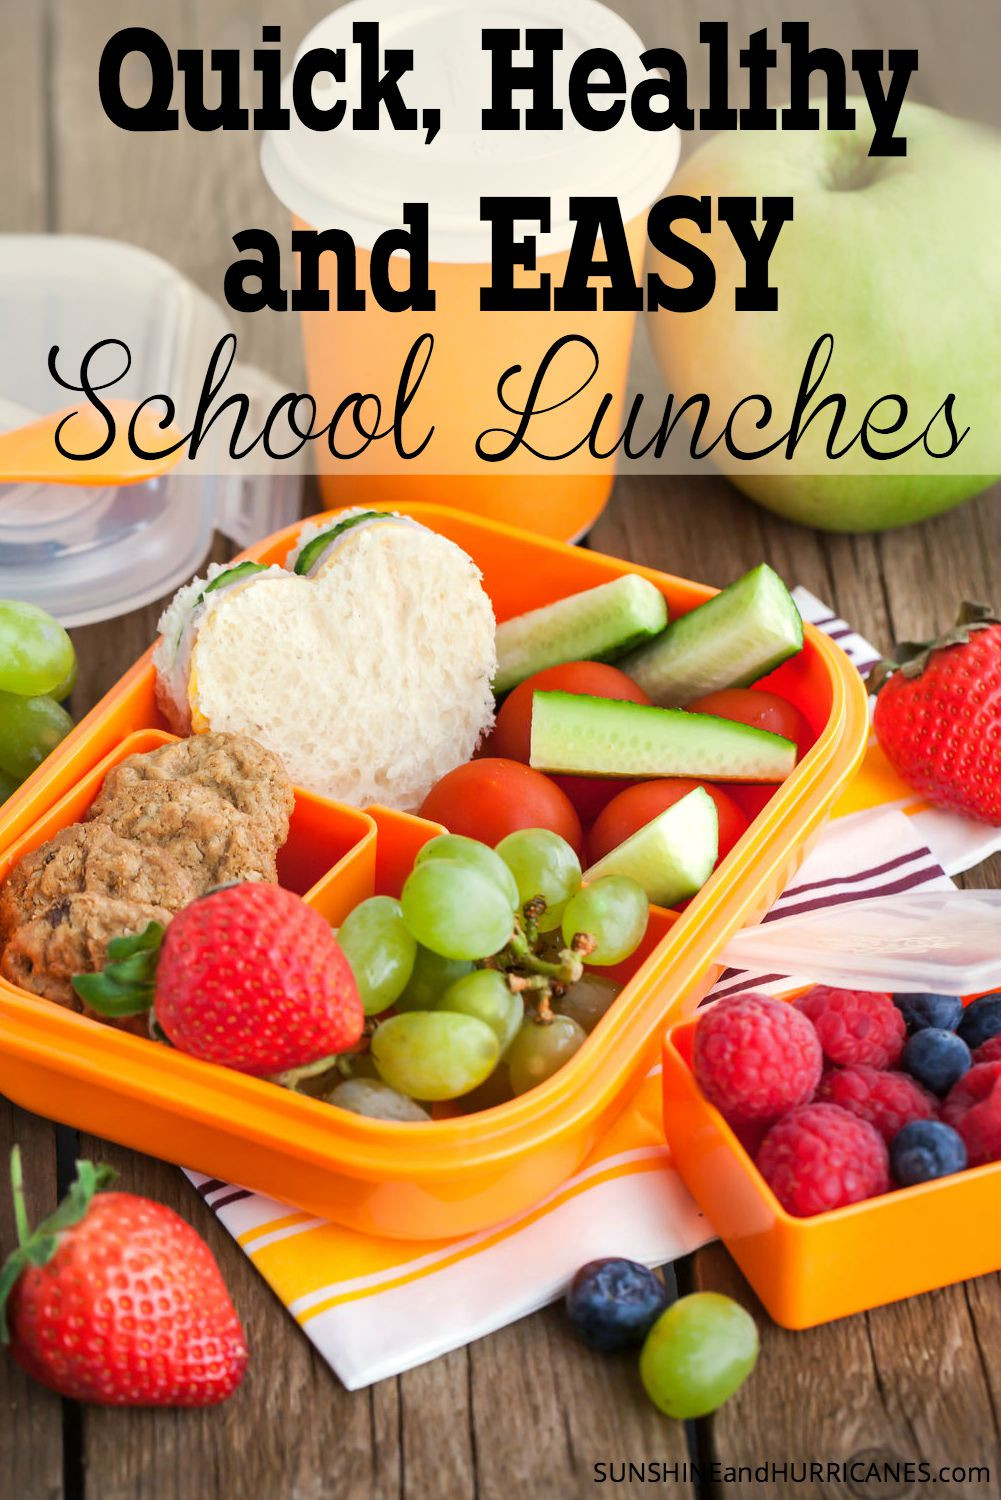 Easy And Healthy School Lunches
 Healthy Quick and Easy School Lunches